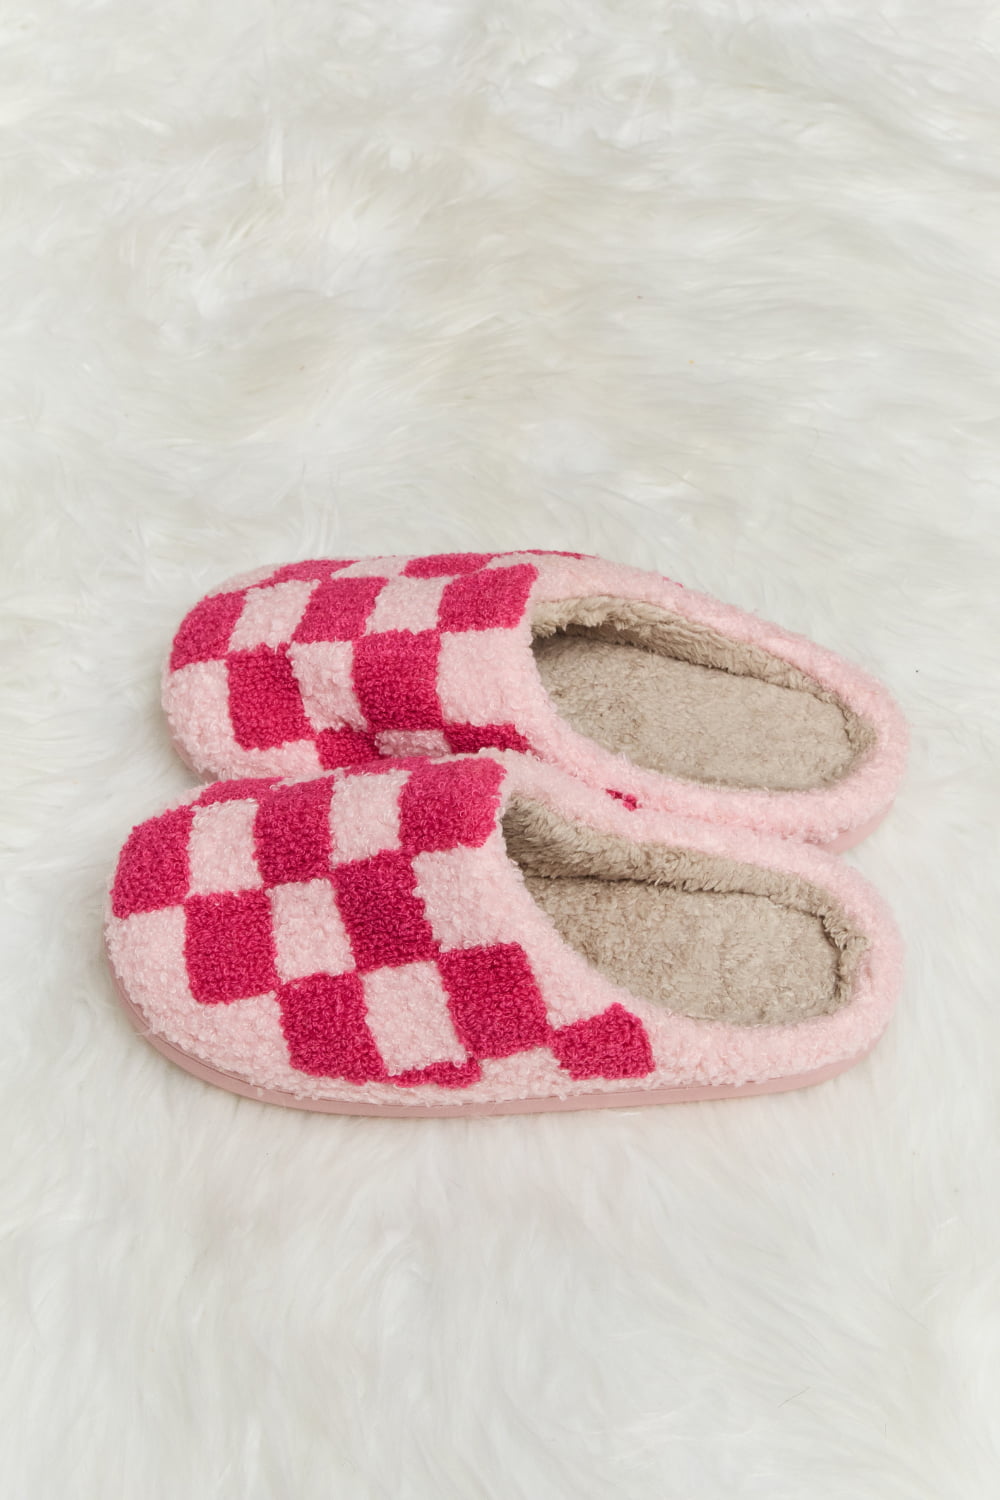 Load image into Gallery viewer, Melody Checkered Print Plush Slide Slippers
